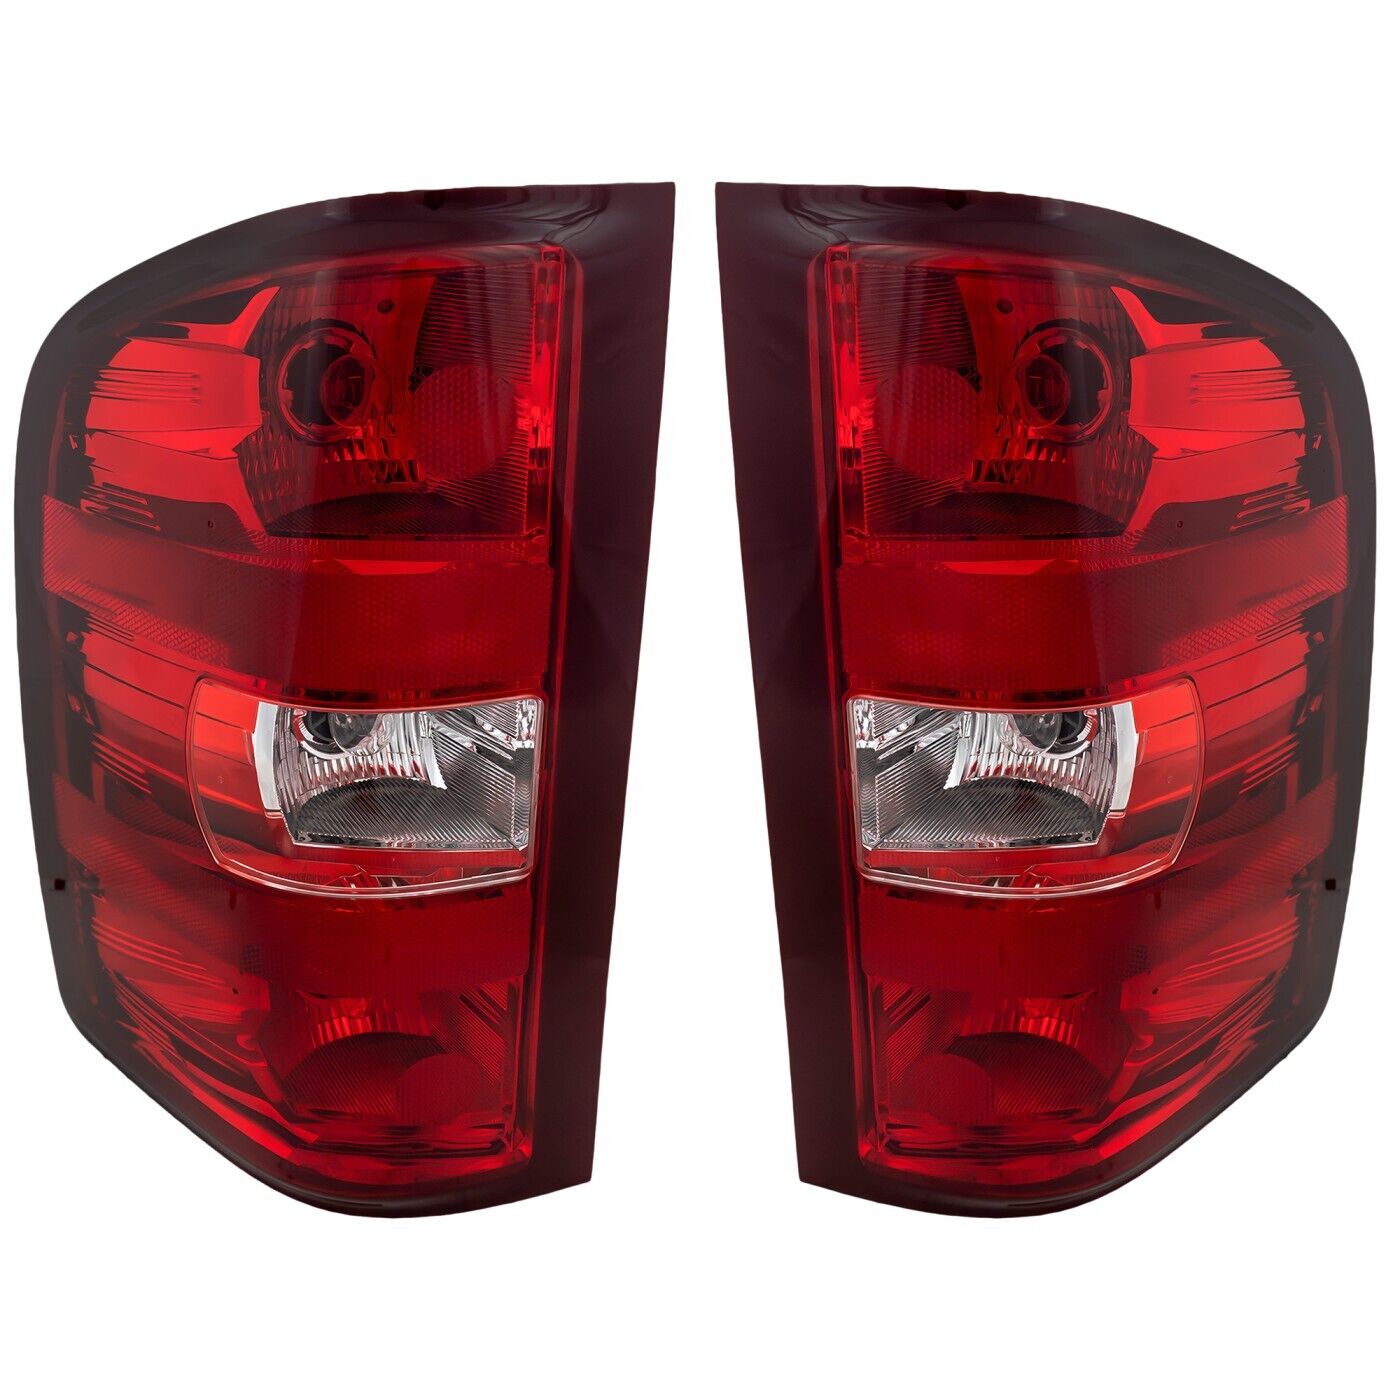 Tail Light Set For 2007-2013 Chevrolet Silverado 1500 Left and Right With Bulb